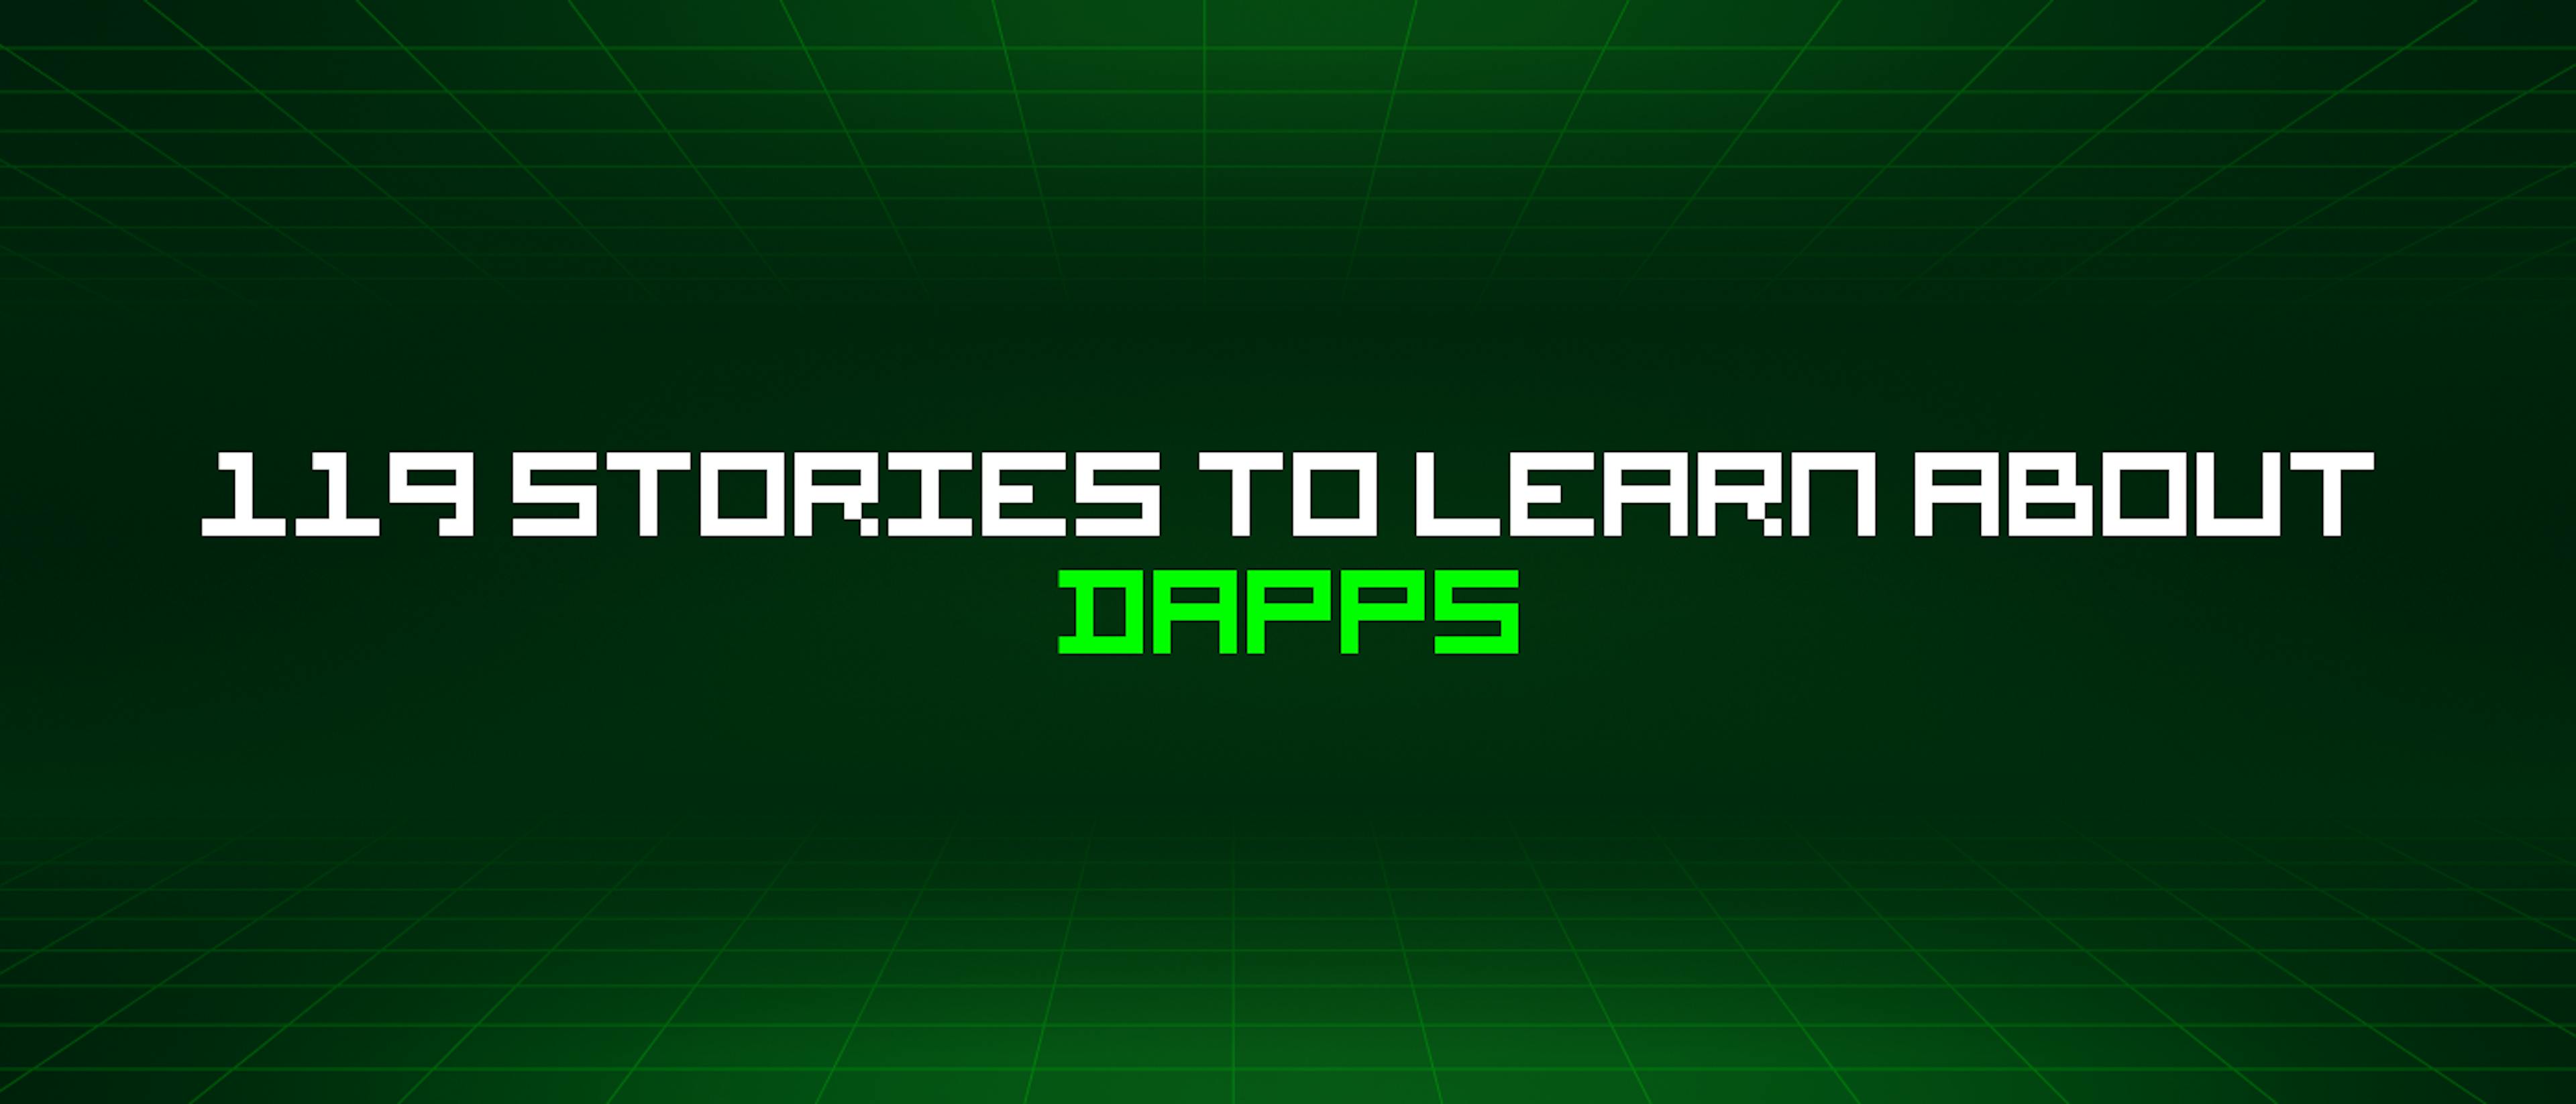 featured image - 119 Stories To Learn About Dapps